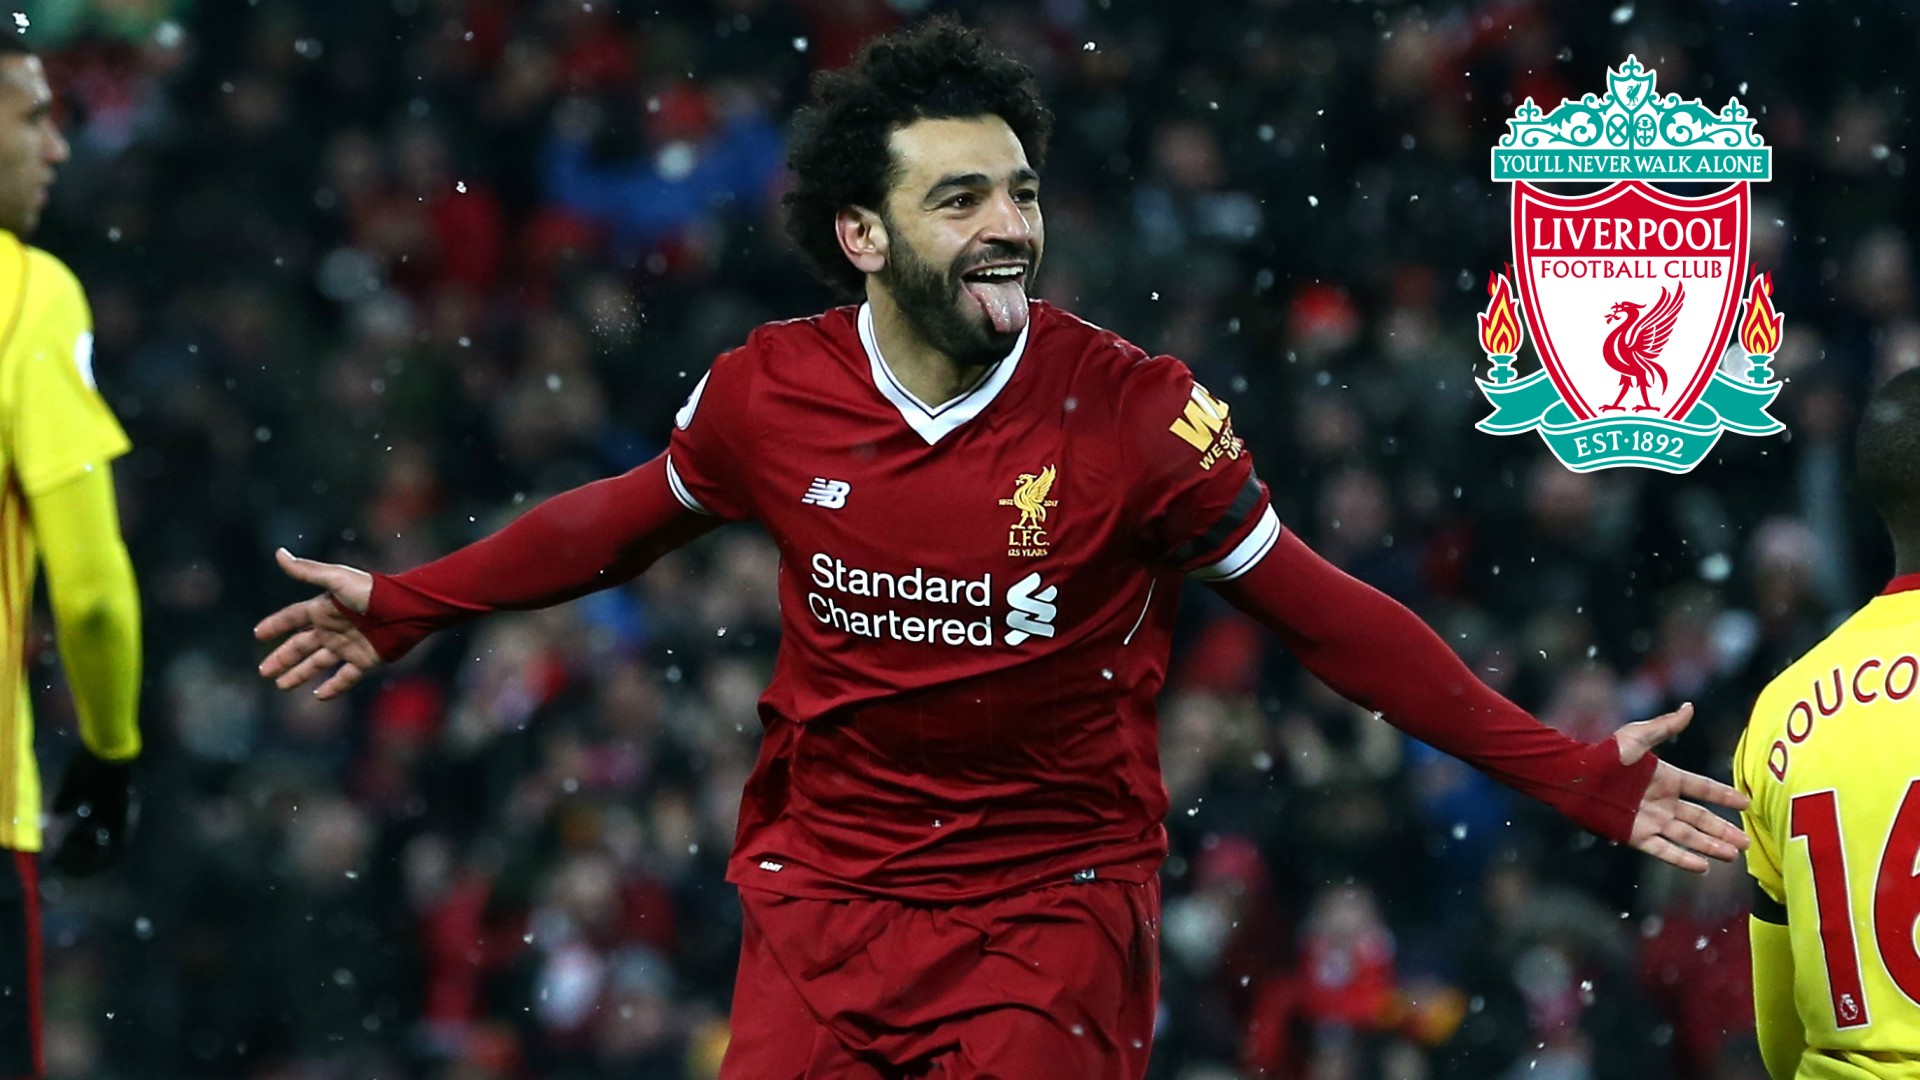 Wallpapers Computer Mohamed Salah with image resolution 1920x1080 pixel. You can make this wallpaper for your Desktop Computer Backgrounds, Mac Wallpapers, Android Lock screen or iPhone Screensavers